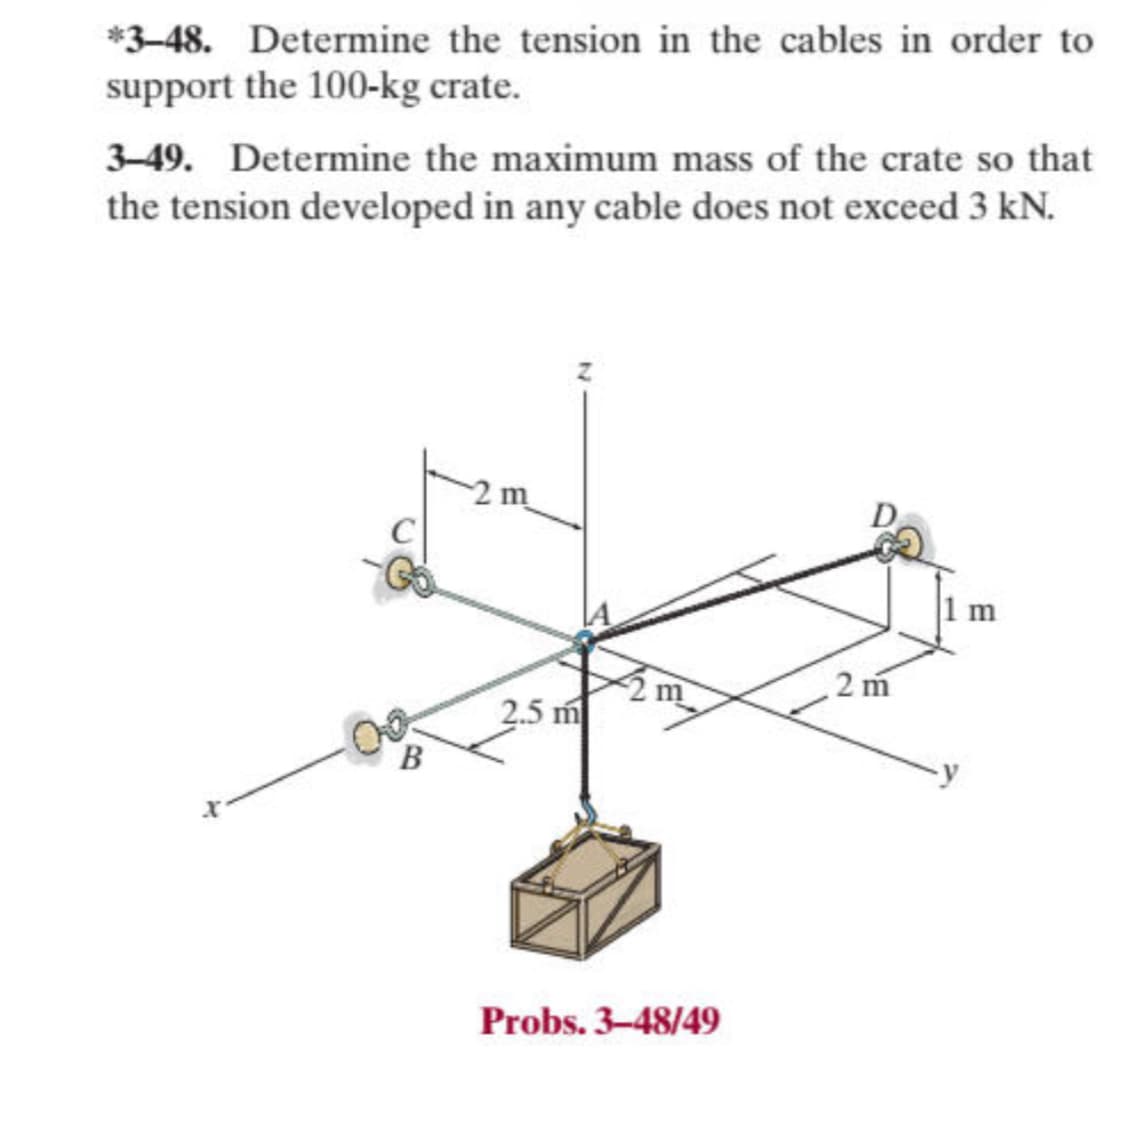 *3-48. Determine the tension in the cables in order to
support the 100-kg crate.
3-49. Determine the maximum mass of the crate so that
the tension developed in any cable does not exceed 3 kN.
X
C
Go
B
2.5 m
Probs. 3-48/49
2m
1 m